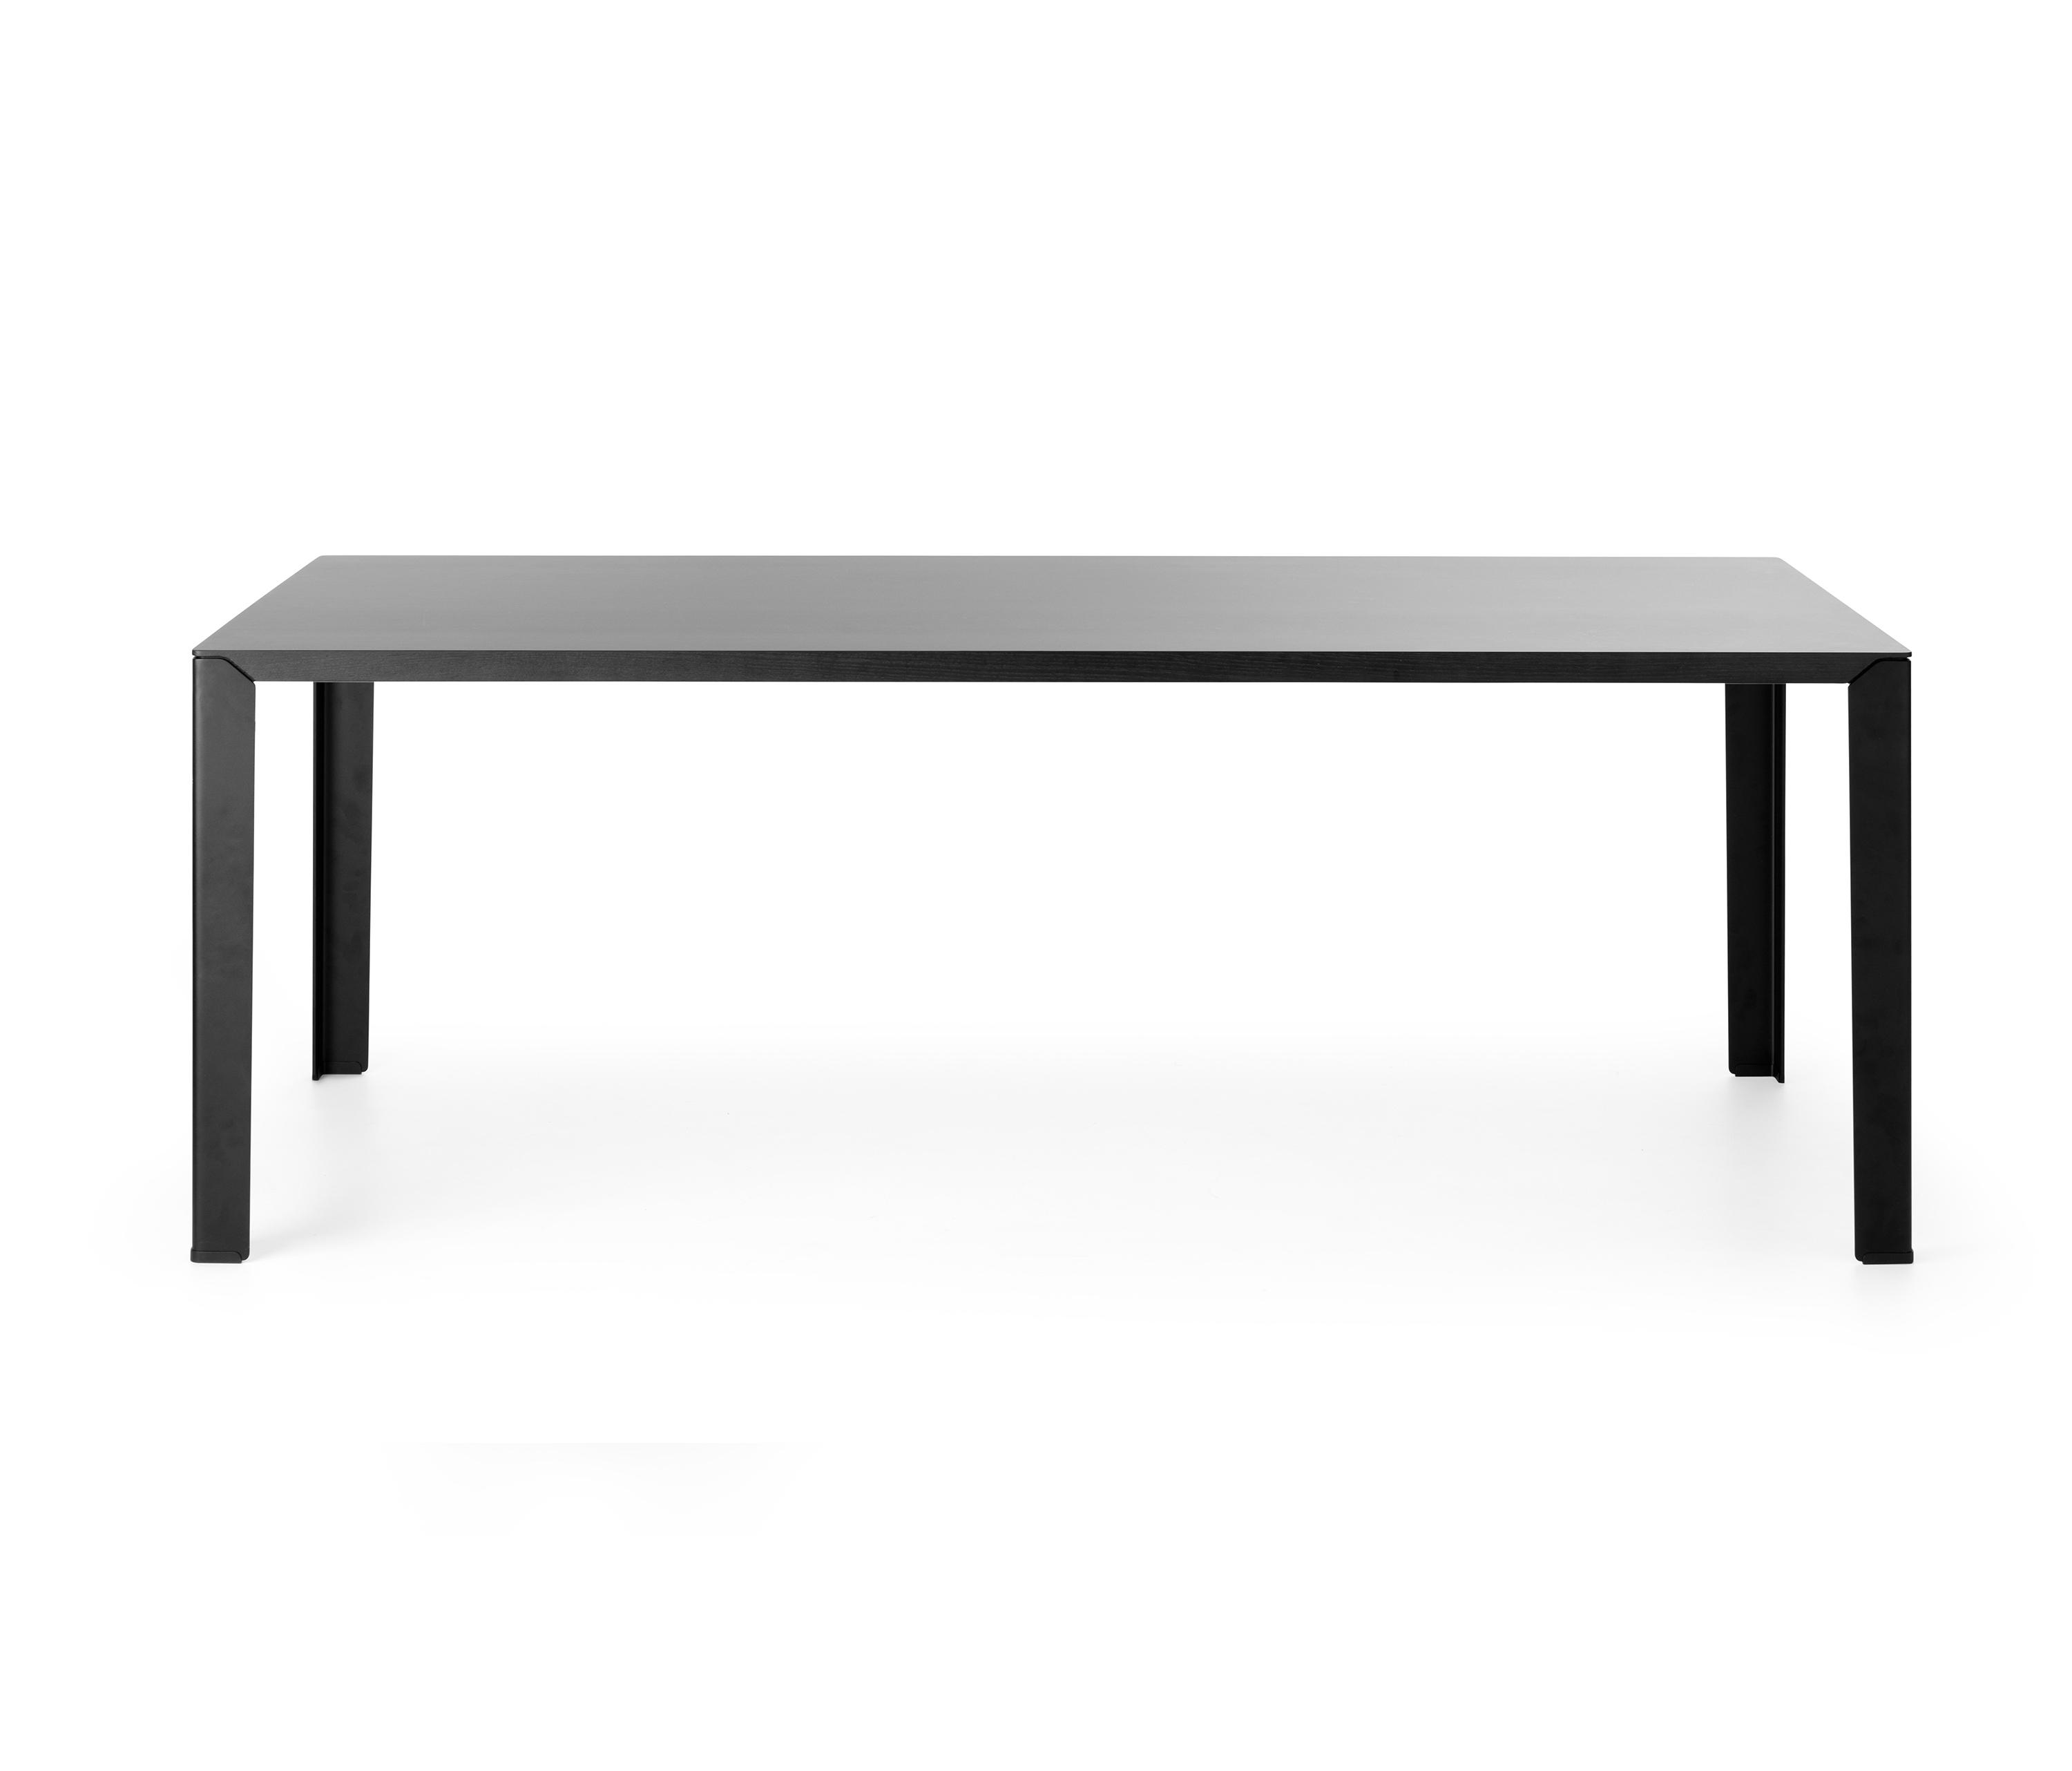 LX620 - Dining tables from Leolux LX | Architonic